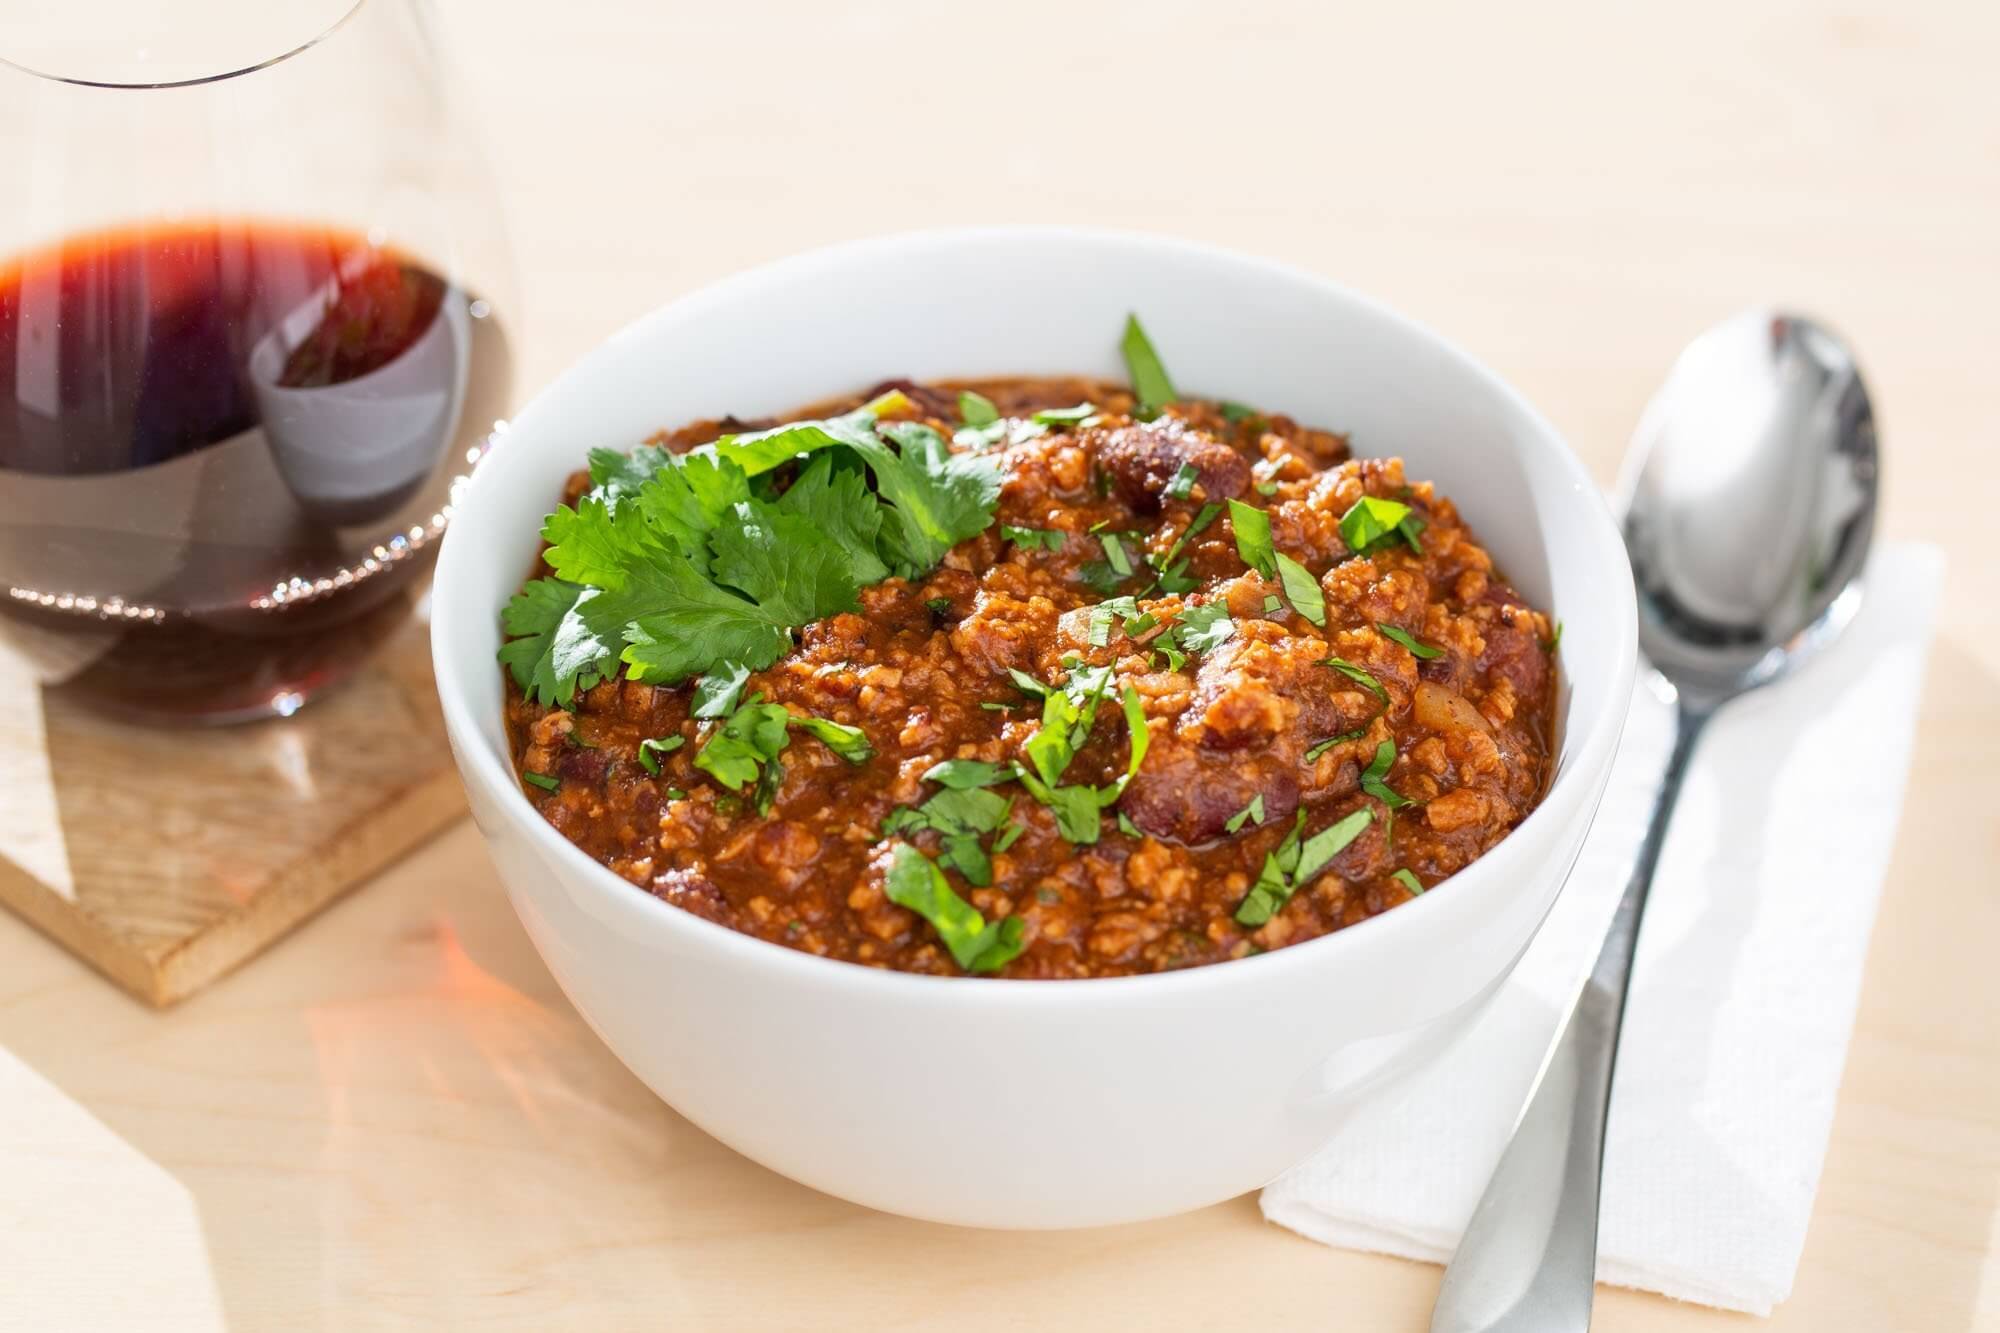 Vegan TVP chili, and a glass of red wine